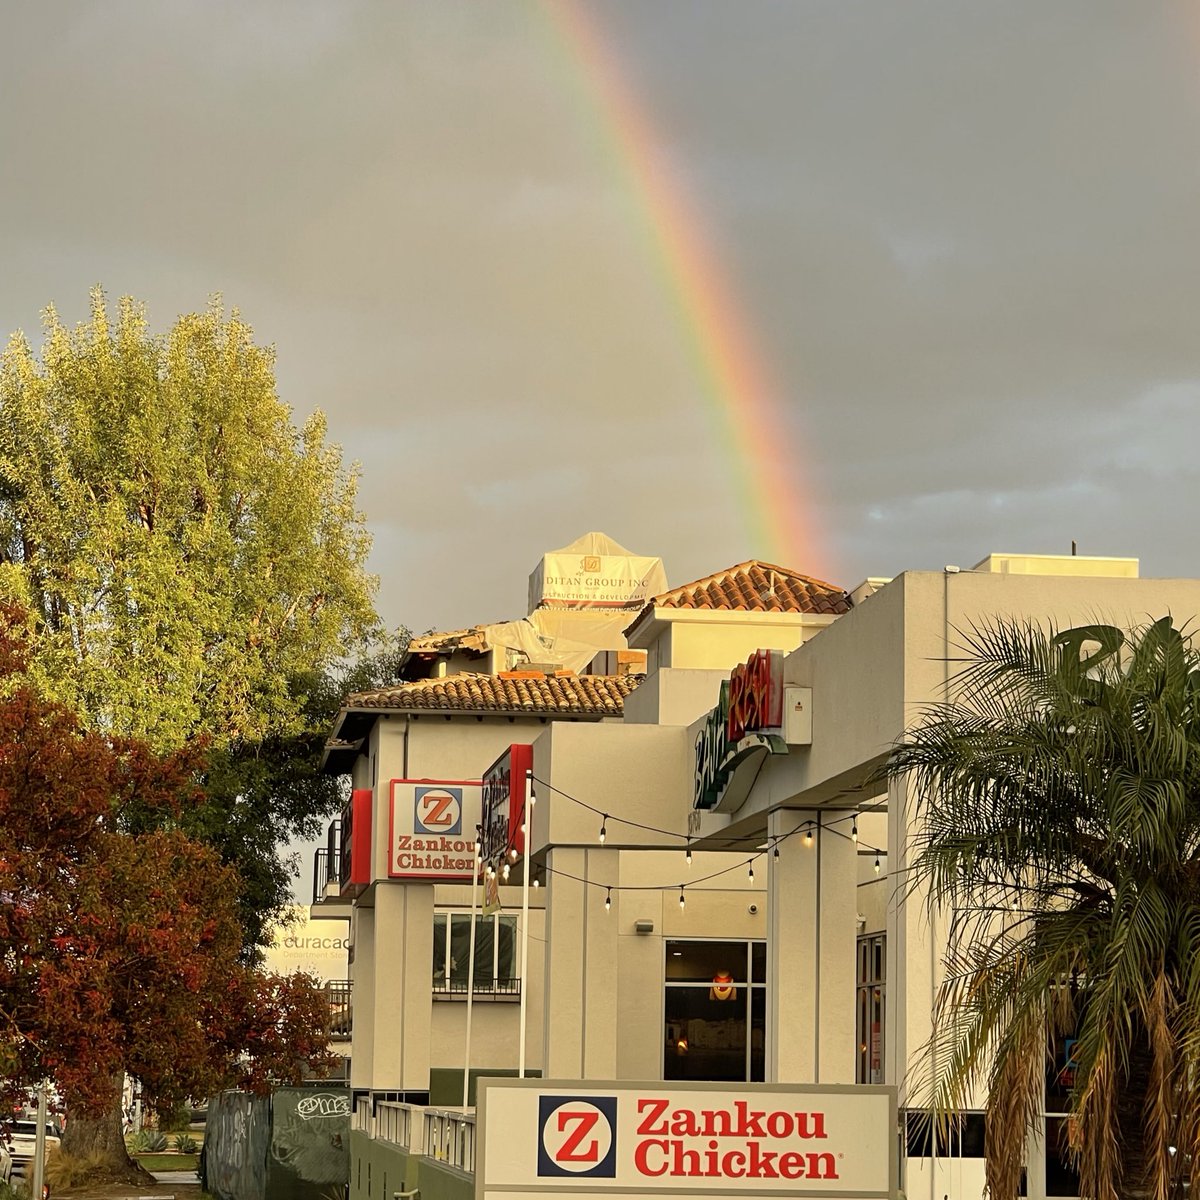 Who would've thought that the pot of gold at the end of the rainbow was the Zankou Chicken garlic sauce?!